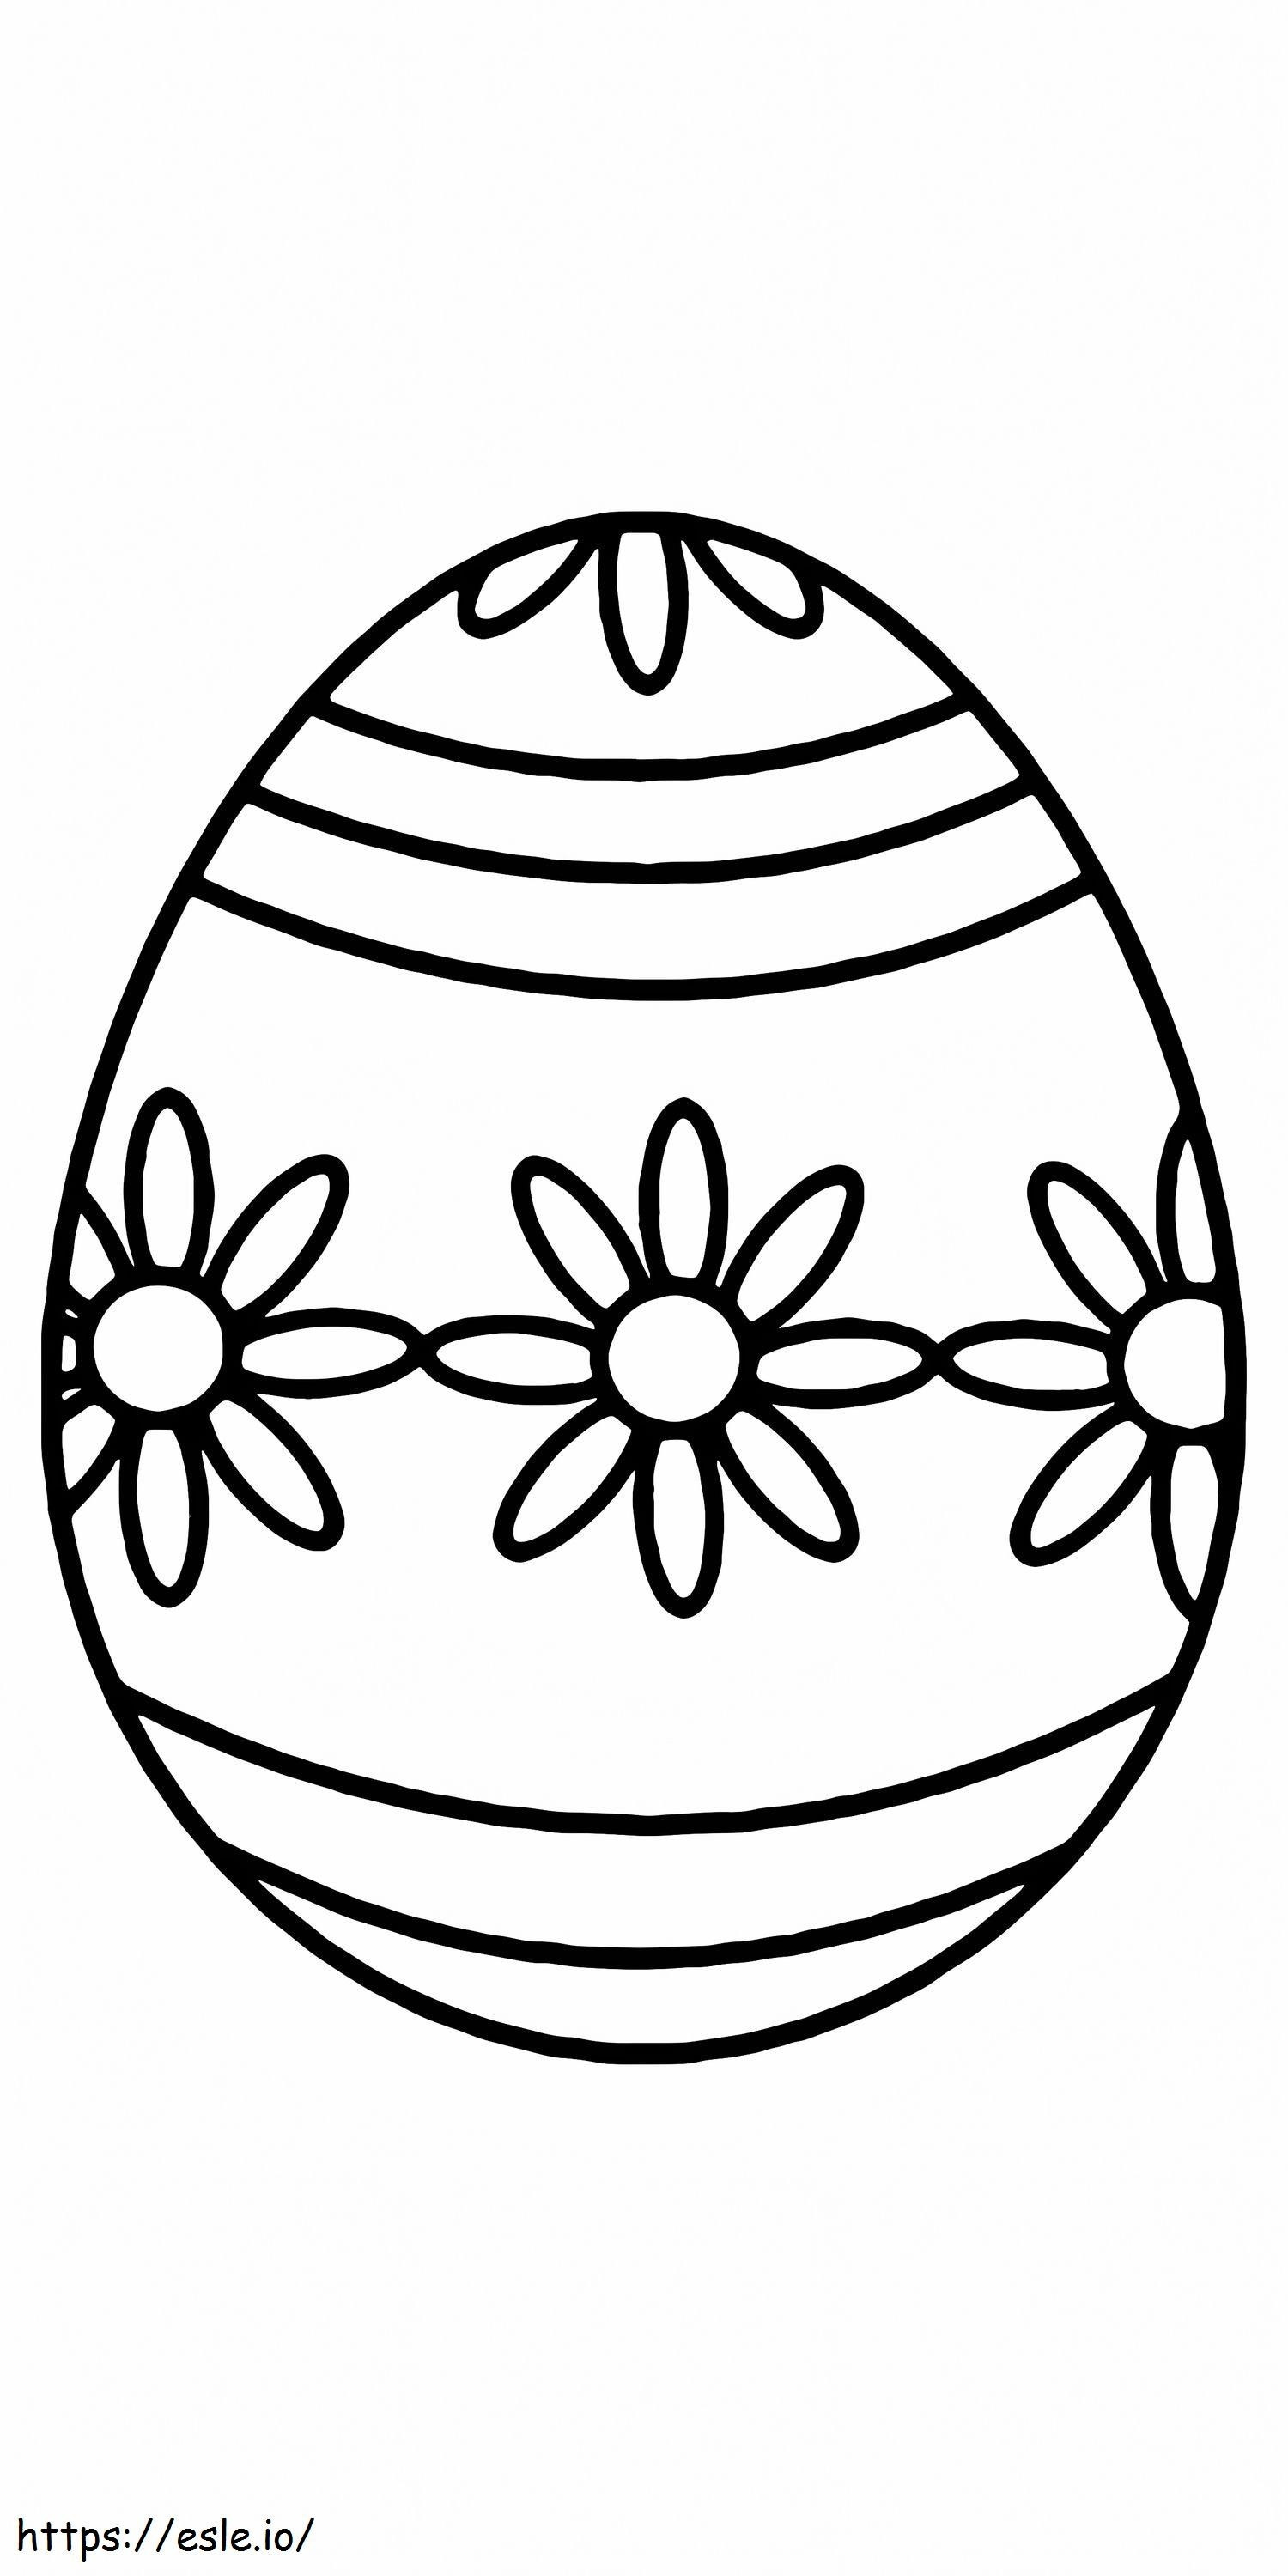 Easter Egg Flower Patterns Printable 16 coloring page